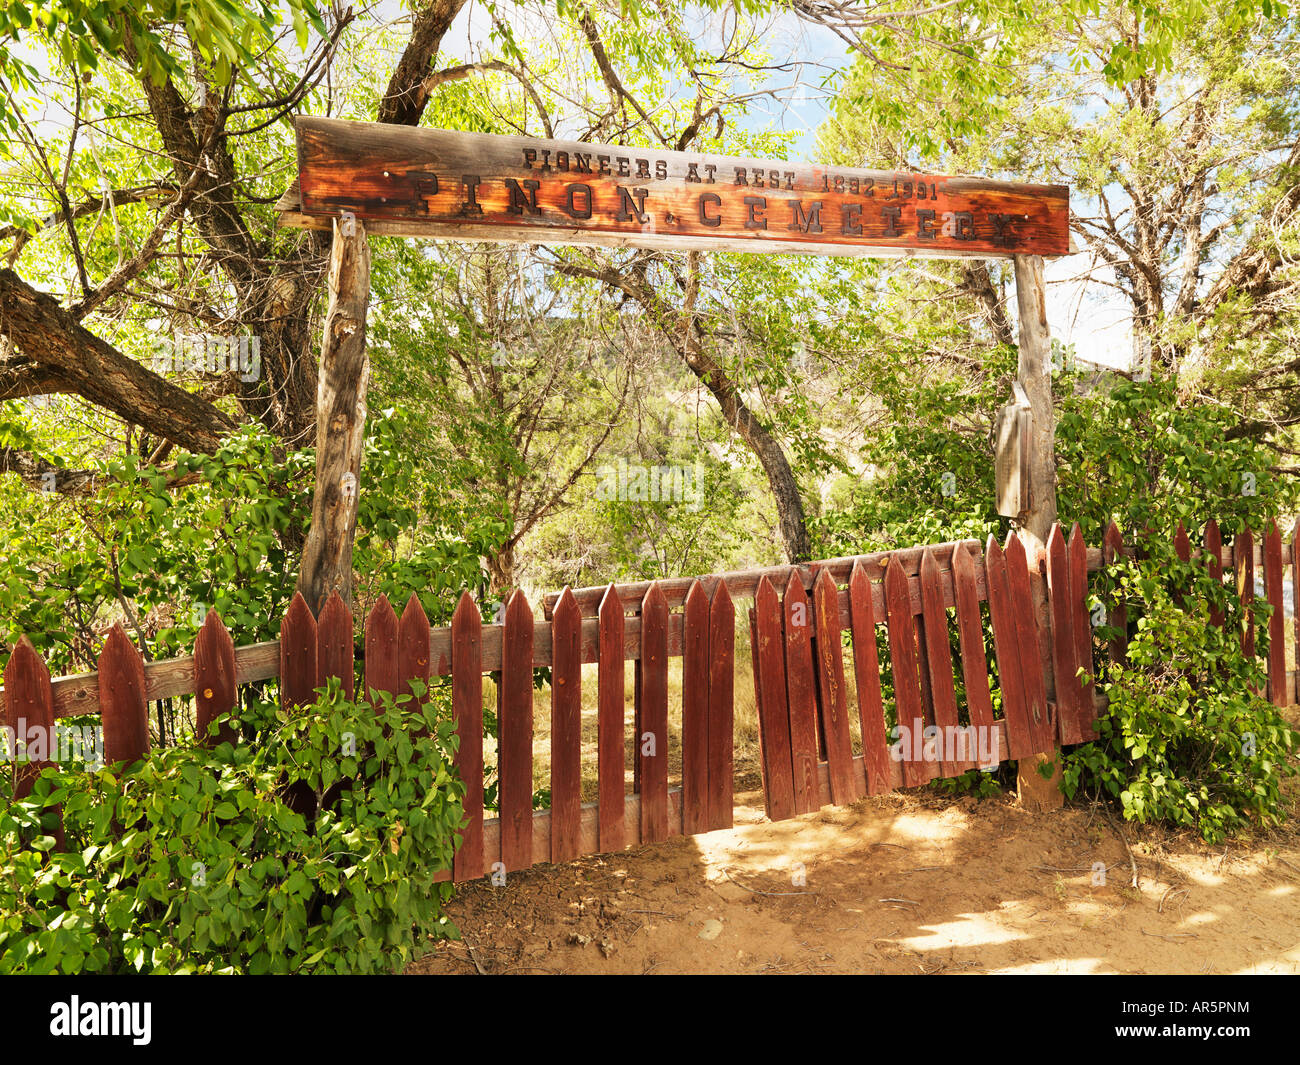 Pioneer cemetery entrance with gate and sign in woods Stock Photo